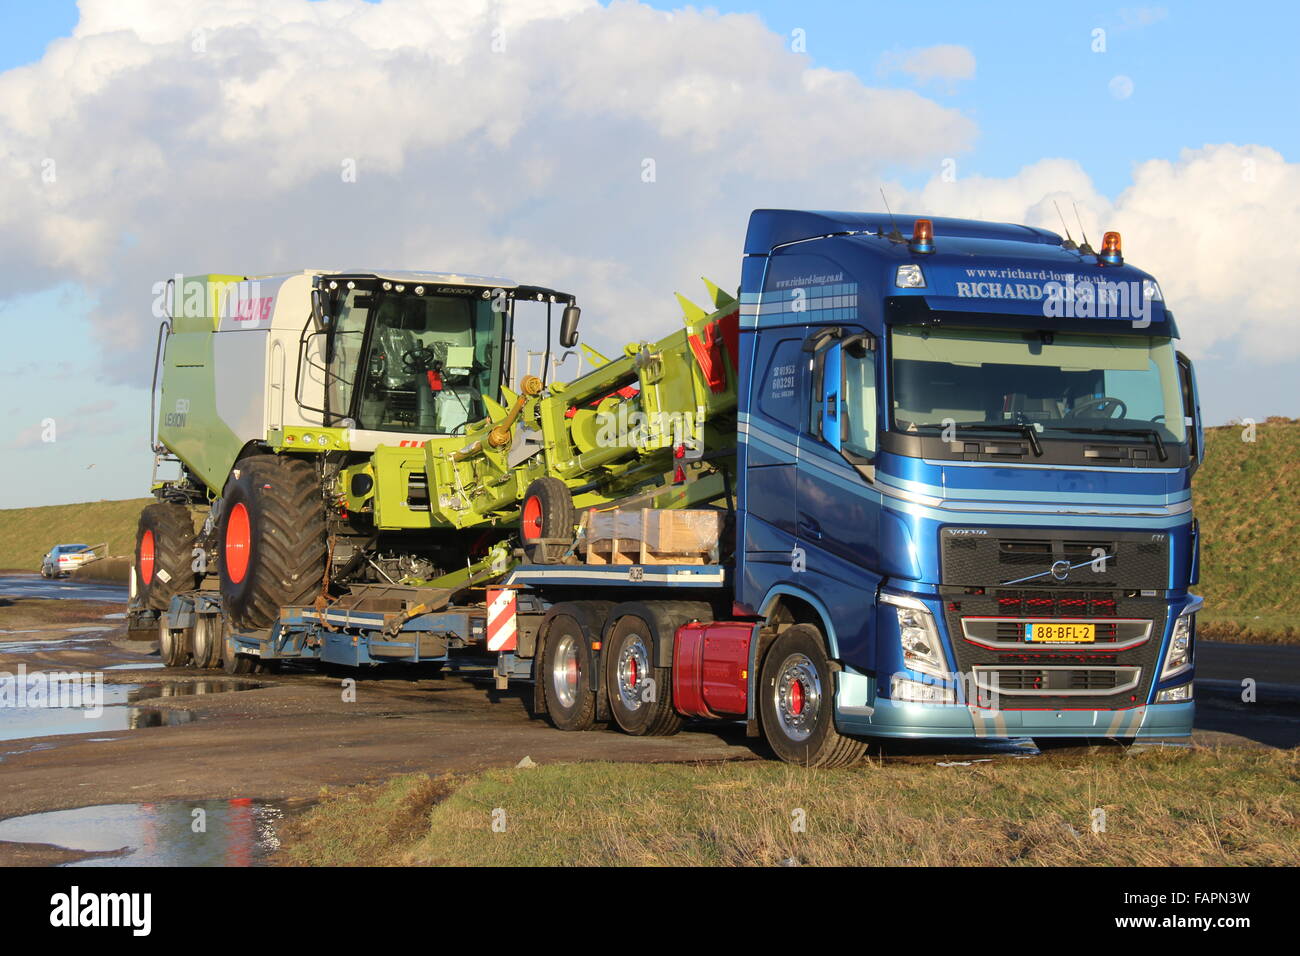 A BLUE VOLVO TRUCK FROM THE NETHERLANDS DELIVERING A BRAND NEW GREEN COMBINE HARVESTER TO A UK FARM Stock Photo